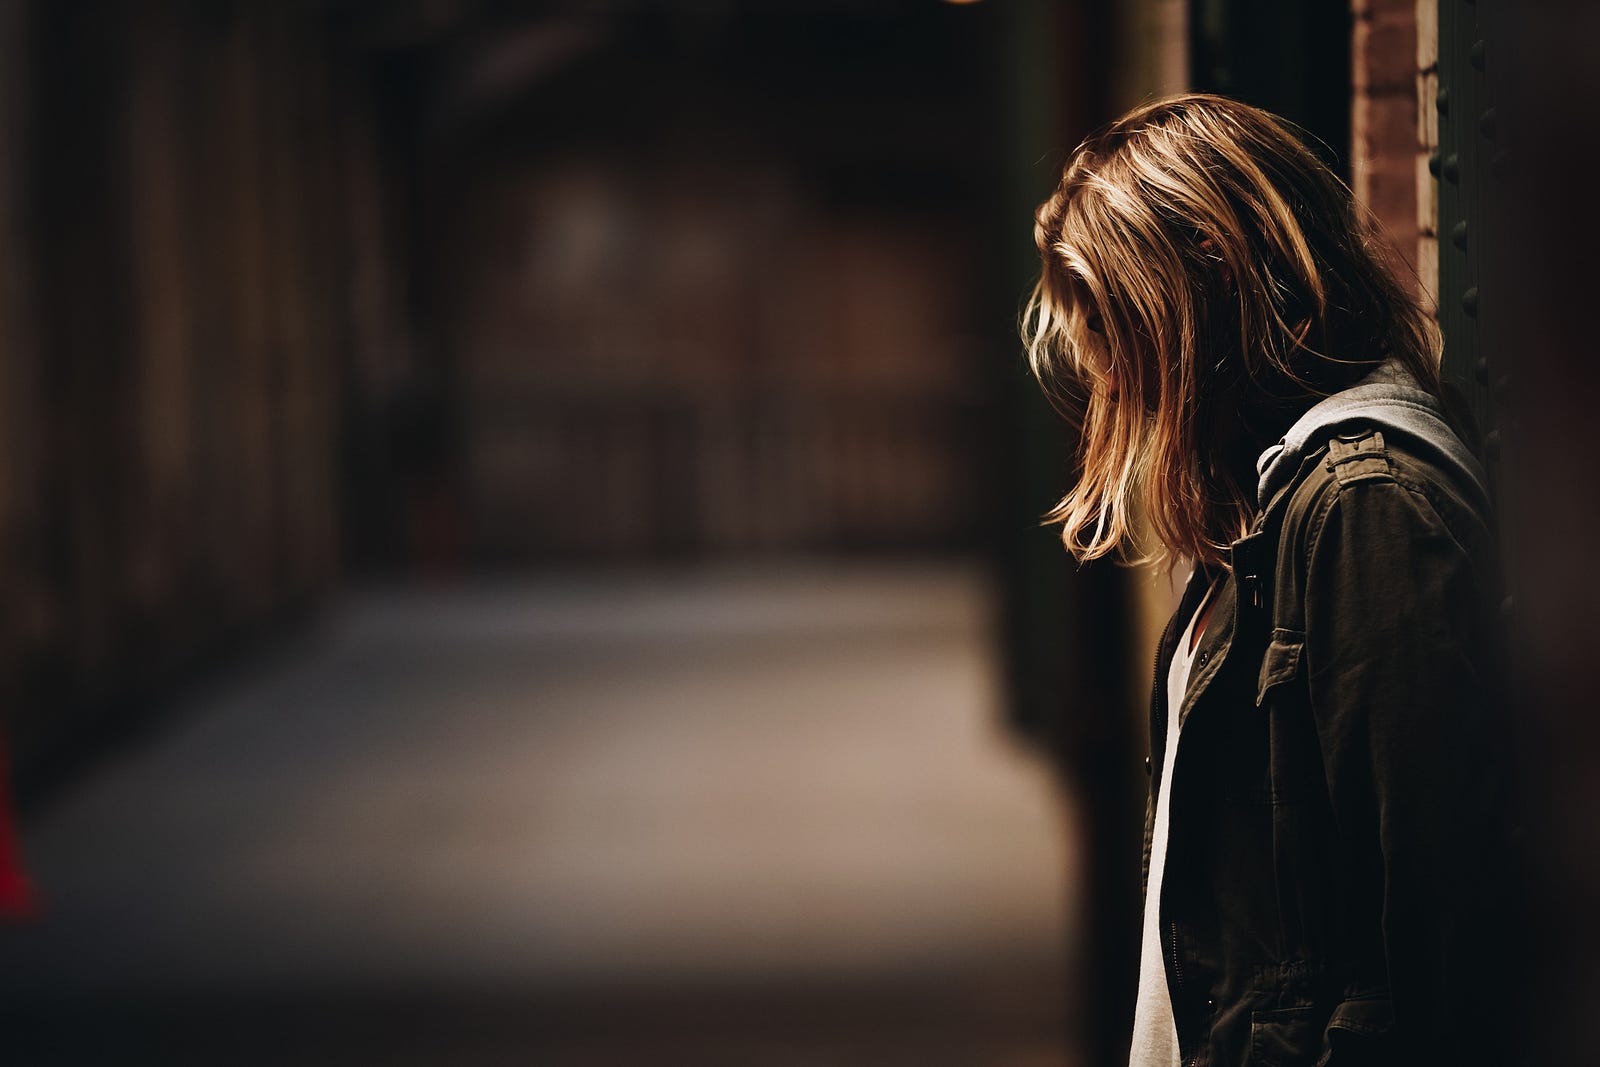 A depressed-appearing young woman has her head facing slightly down as she stands on the right side of an alley. New research suggests that marijuana (cannabis) may improve depression.